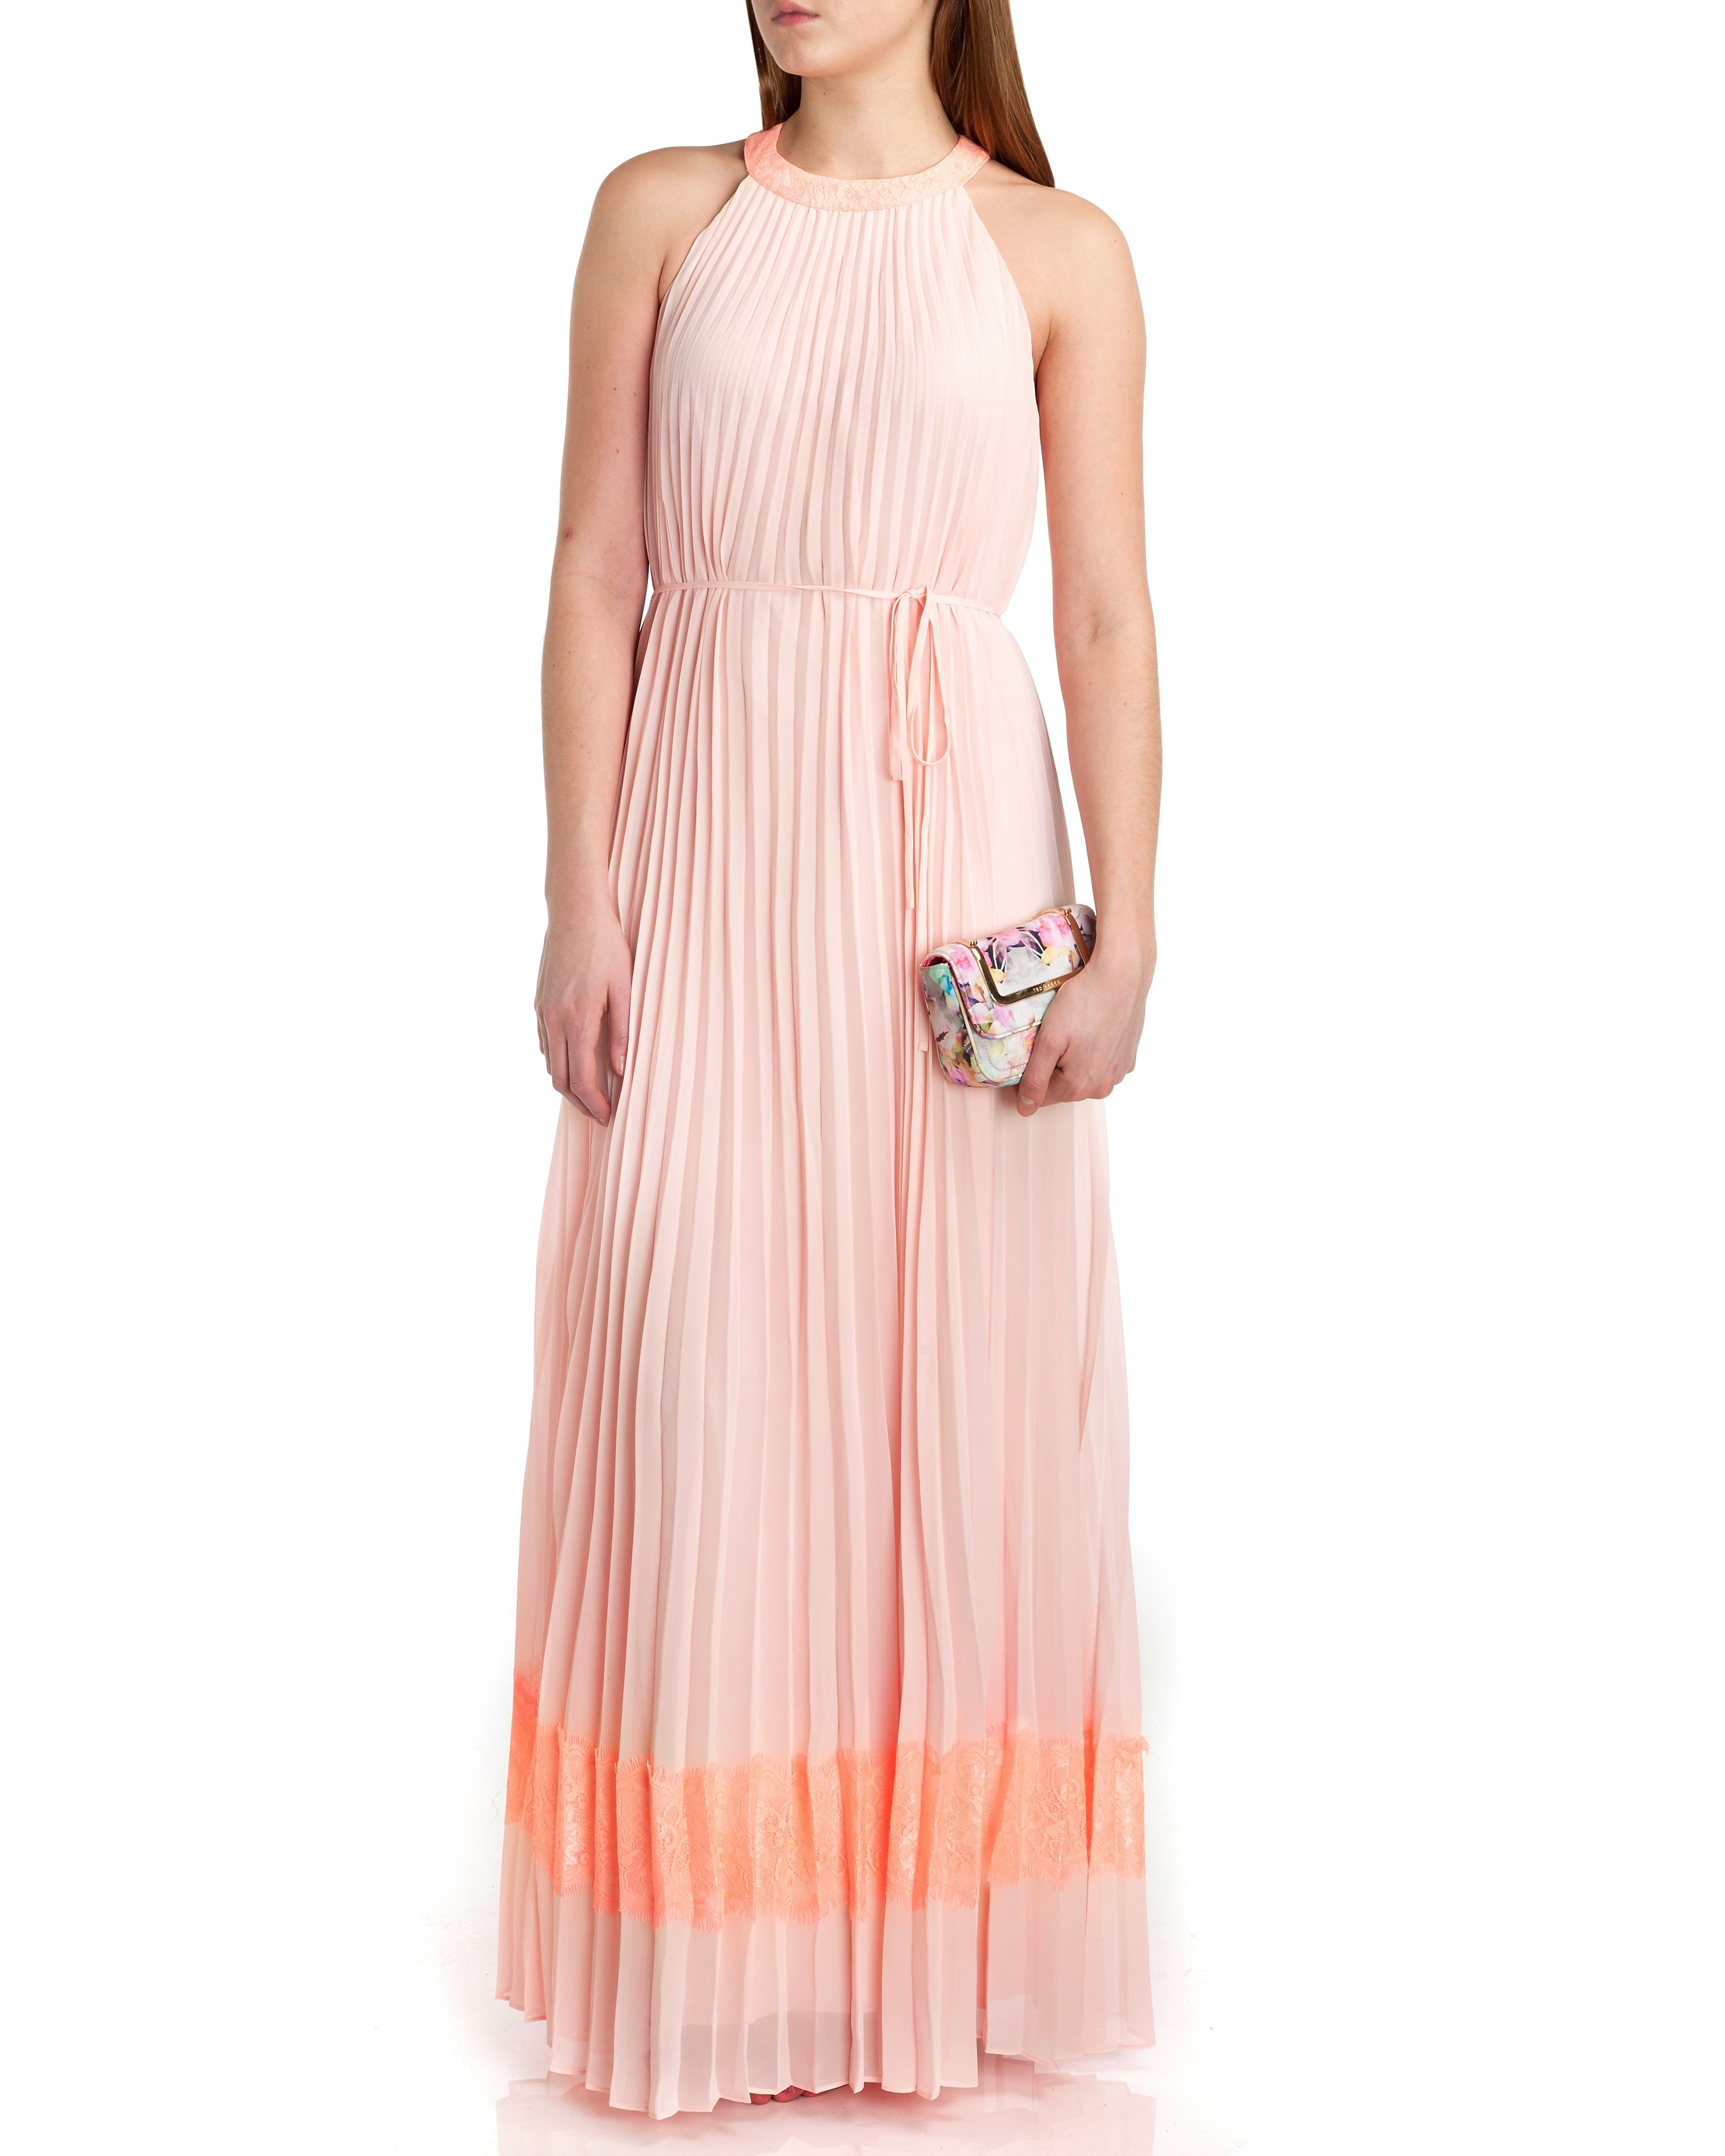 Lyst - Ted baker Marryy Pleated Panel Maxi Dress in Pink